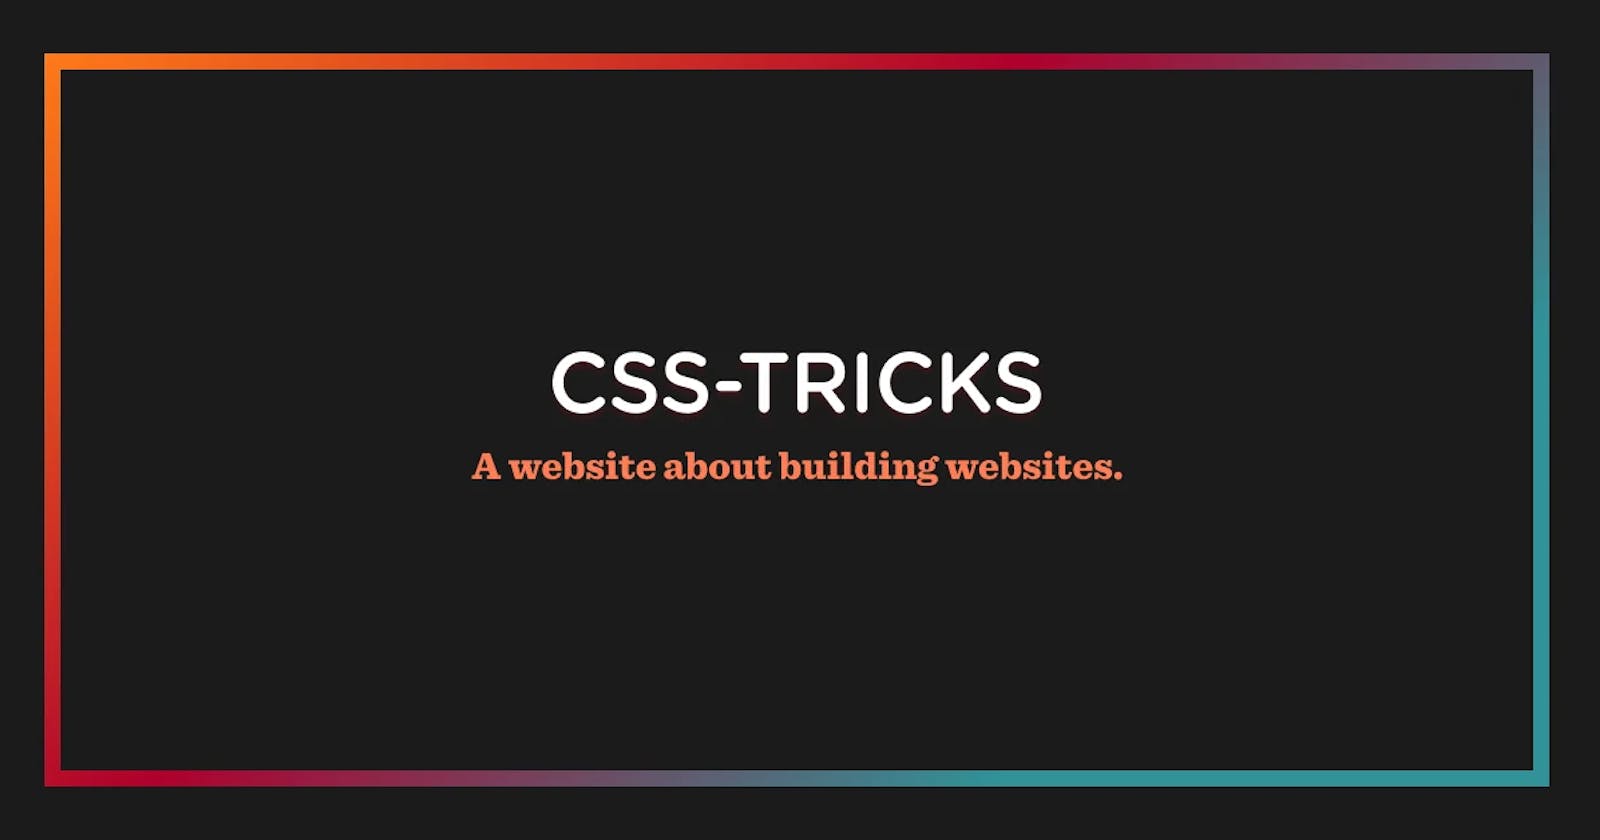 There are 11 CSS principles you should know right now and more.